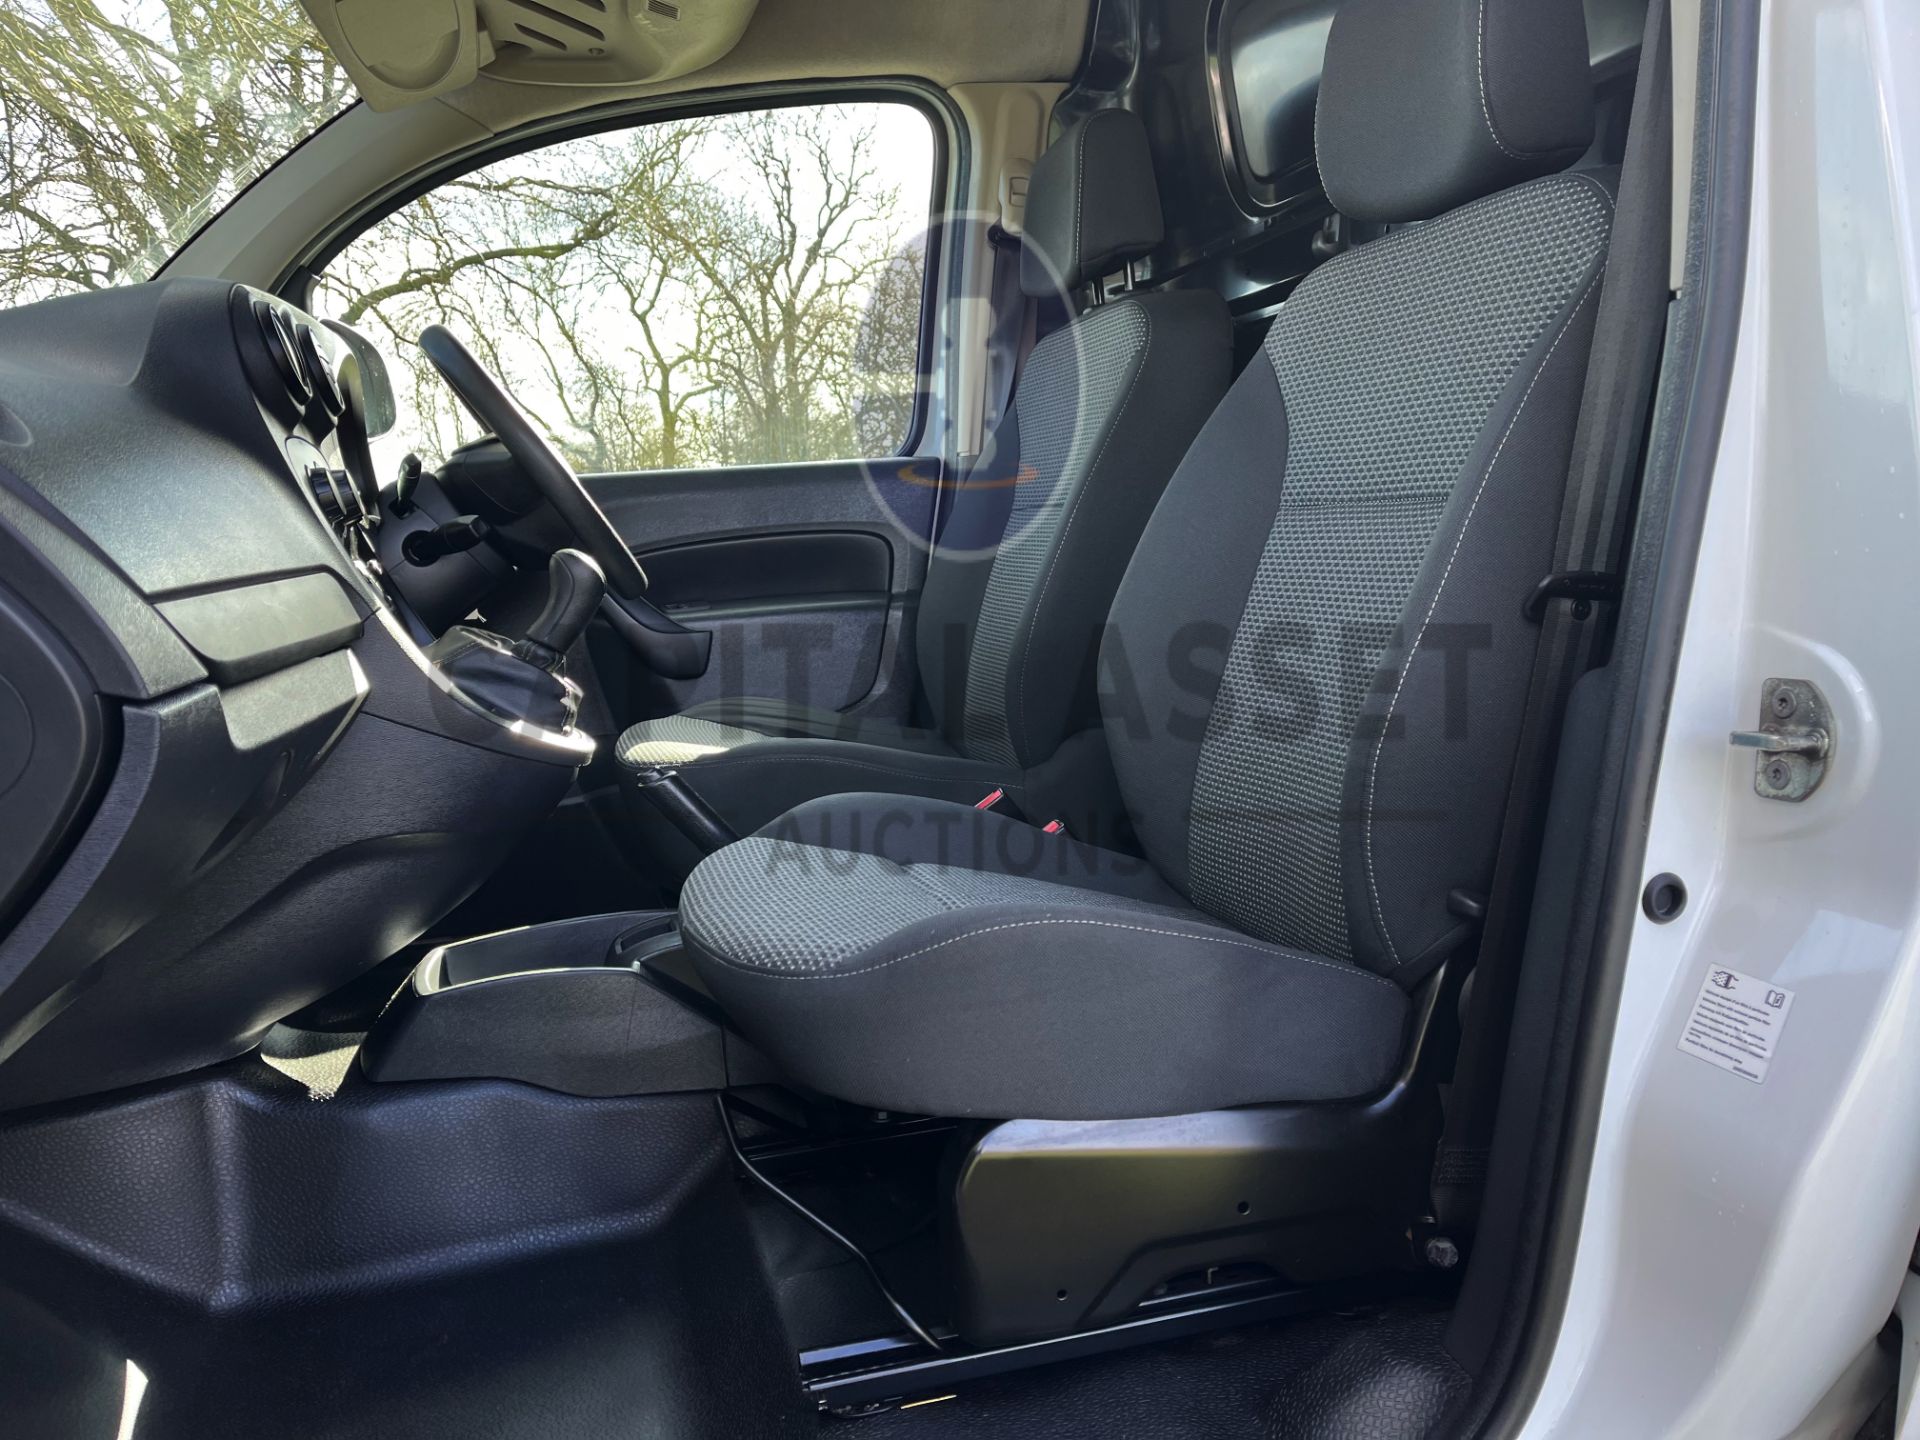 (ON SALE) MERCEDES CITAN 109CDI BLUEEFFICIENCY (68 REG) 1 OWNER FROM NEW - FSH- EURO 6 - Image 22 of 24